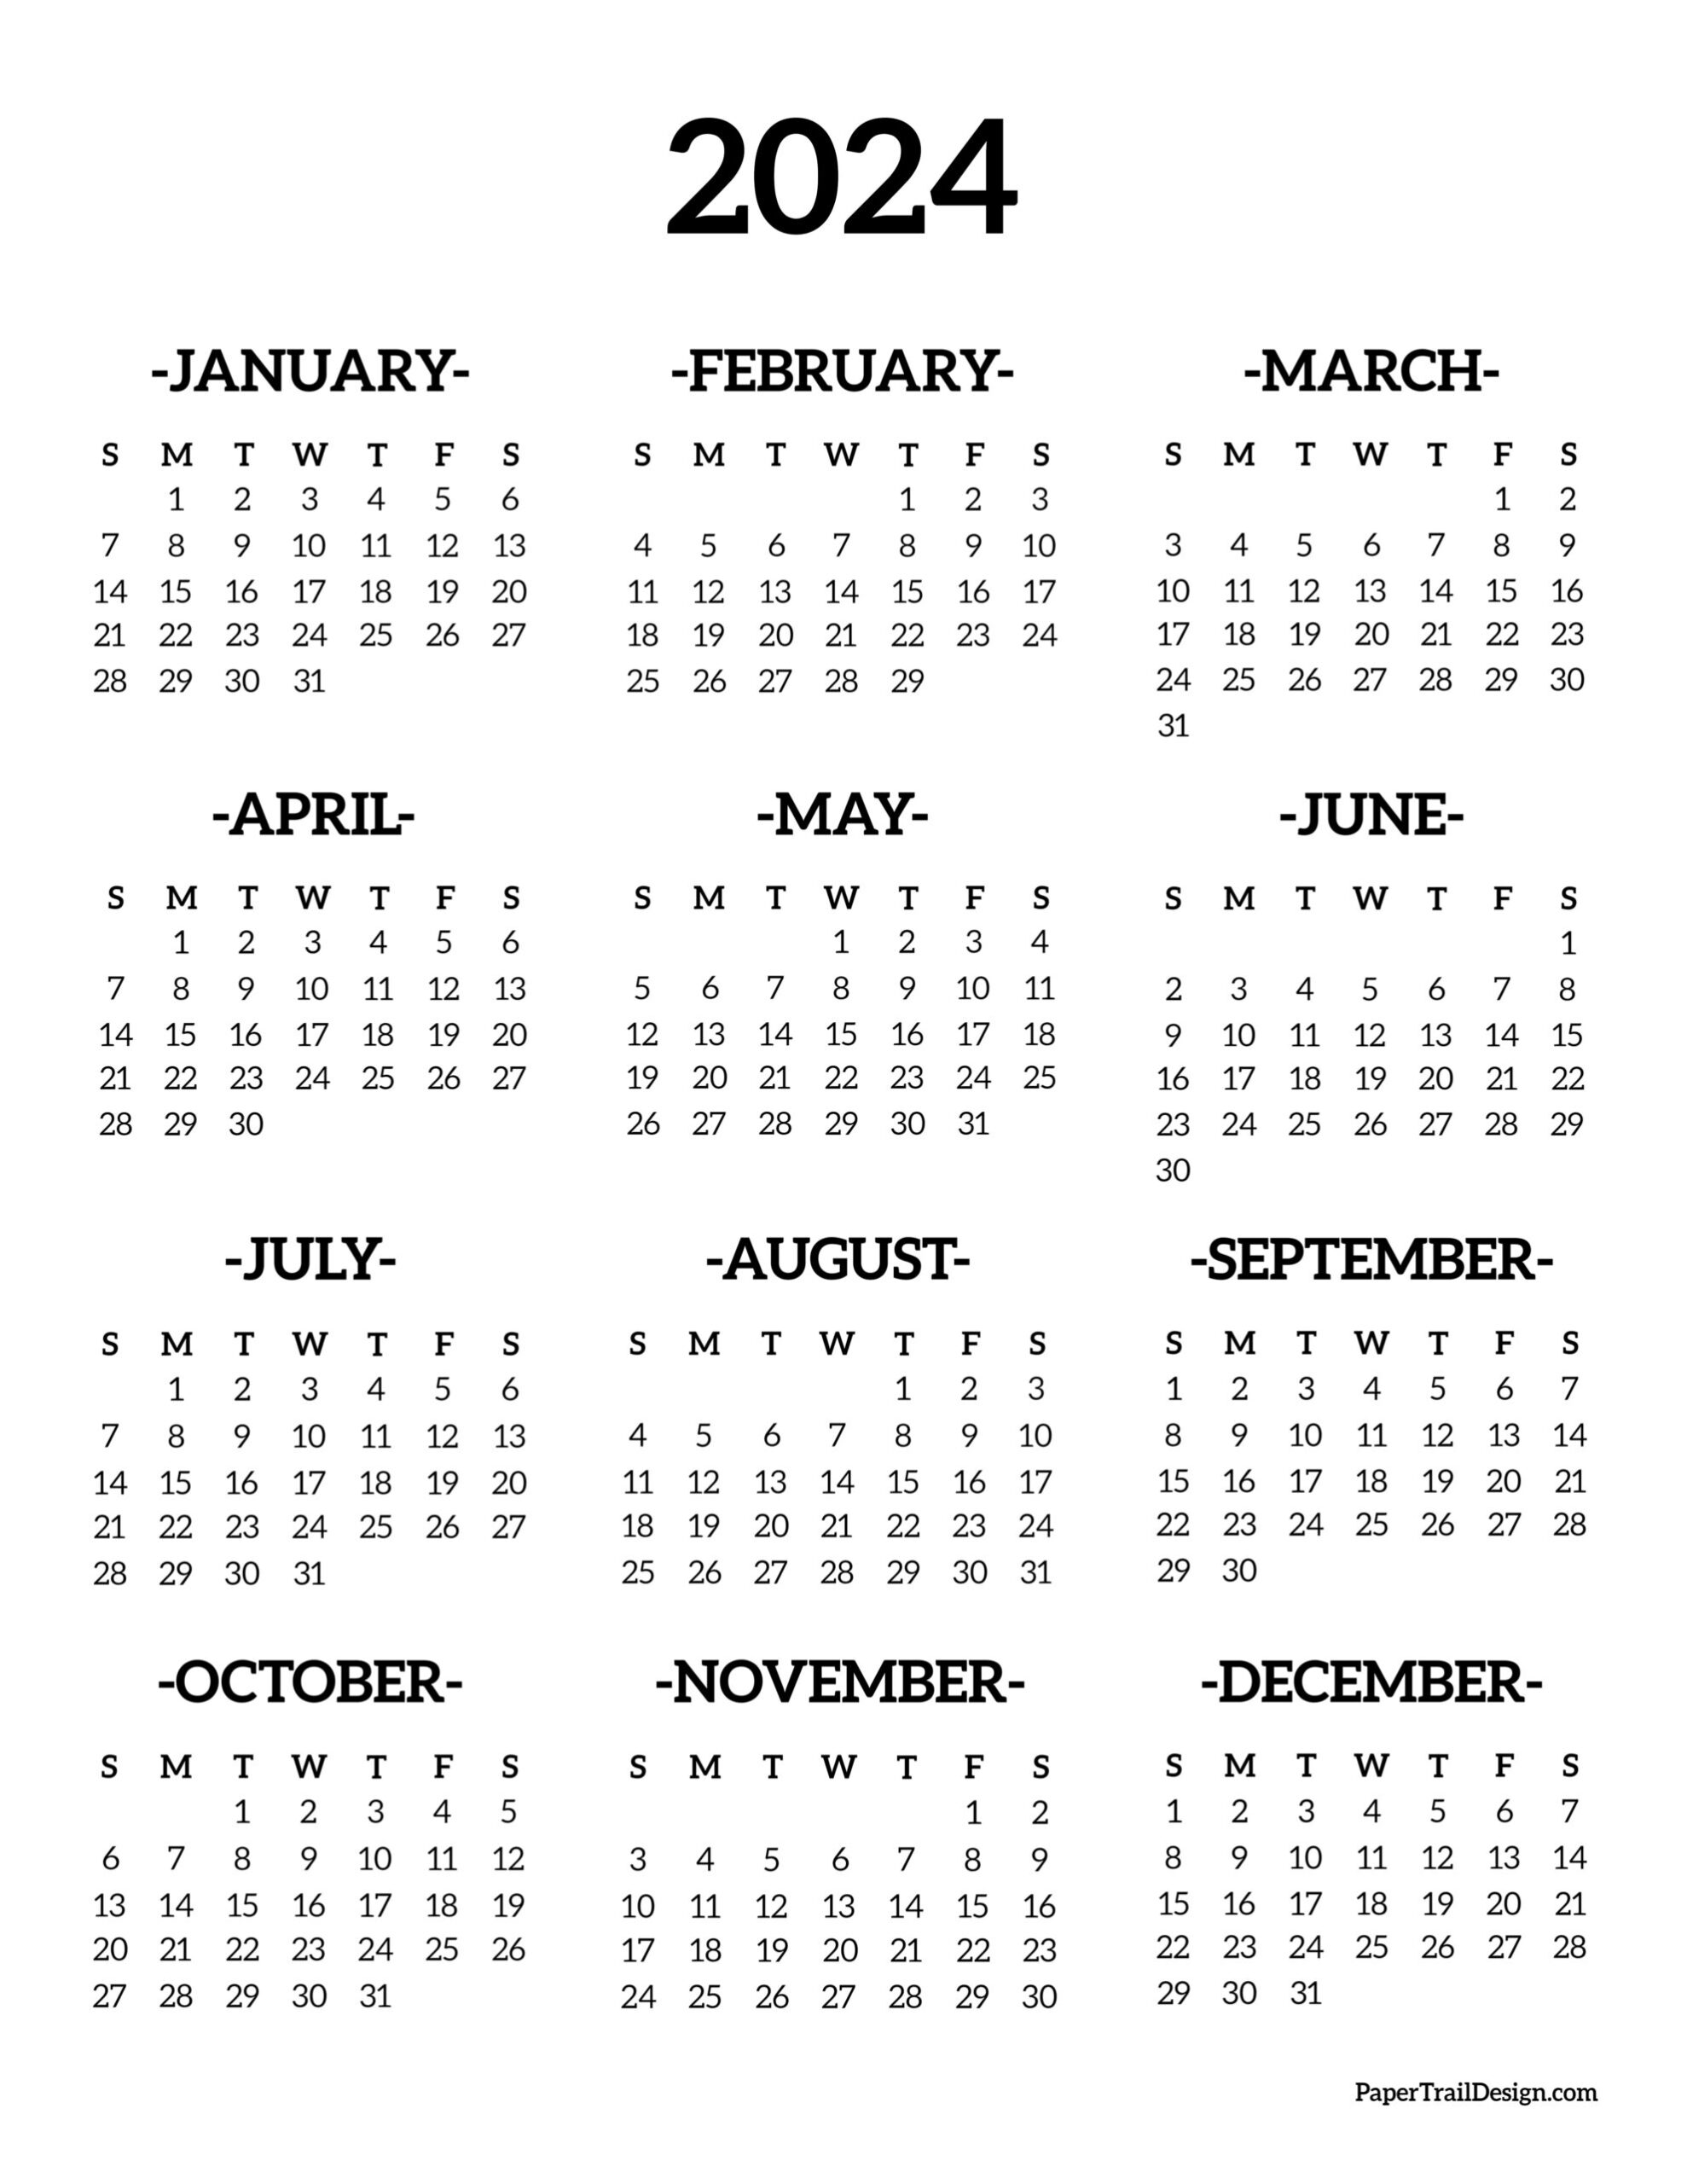 Calendar 2024 Printable One Page - Paper Trail Design for 2024 Calendar Printable Yearly